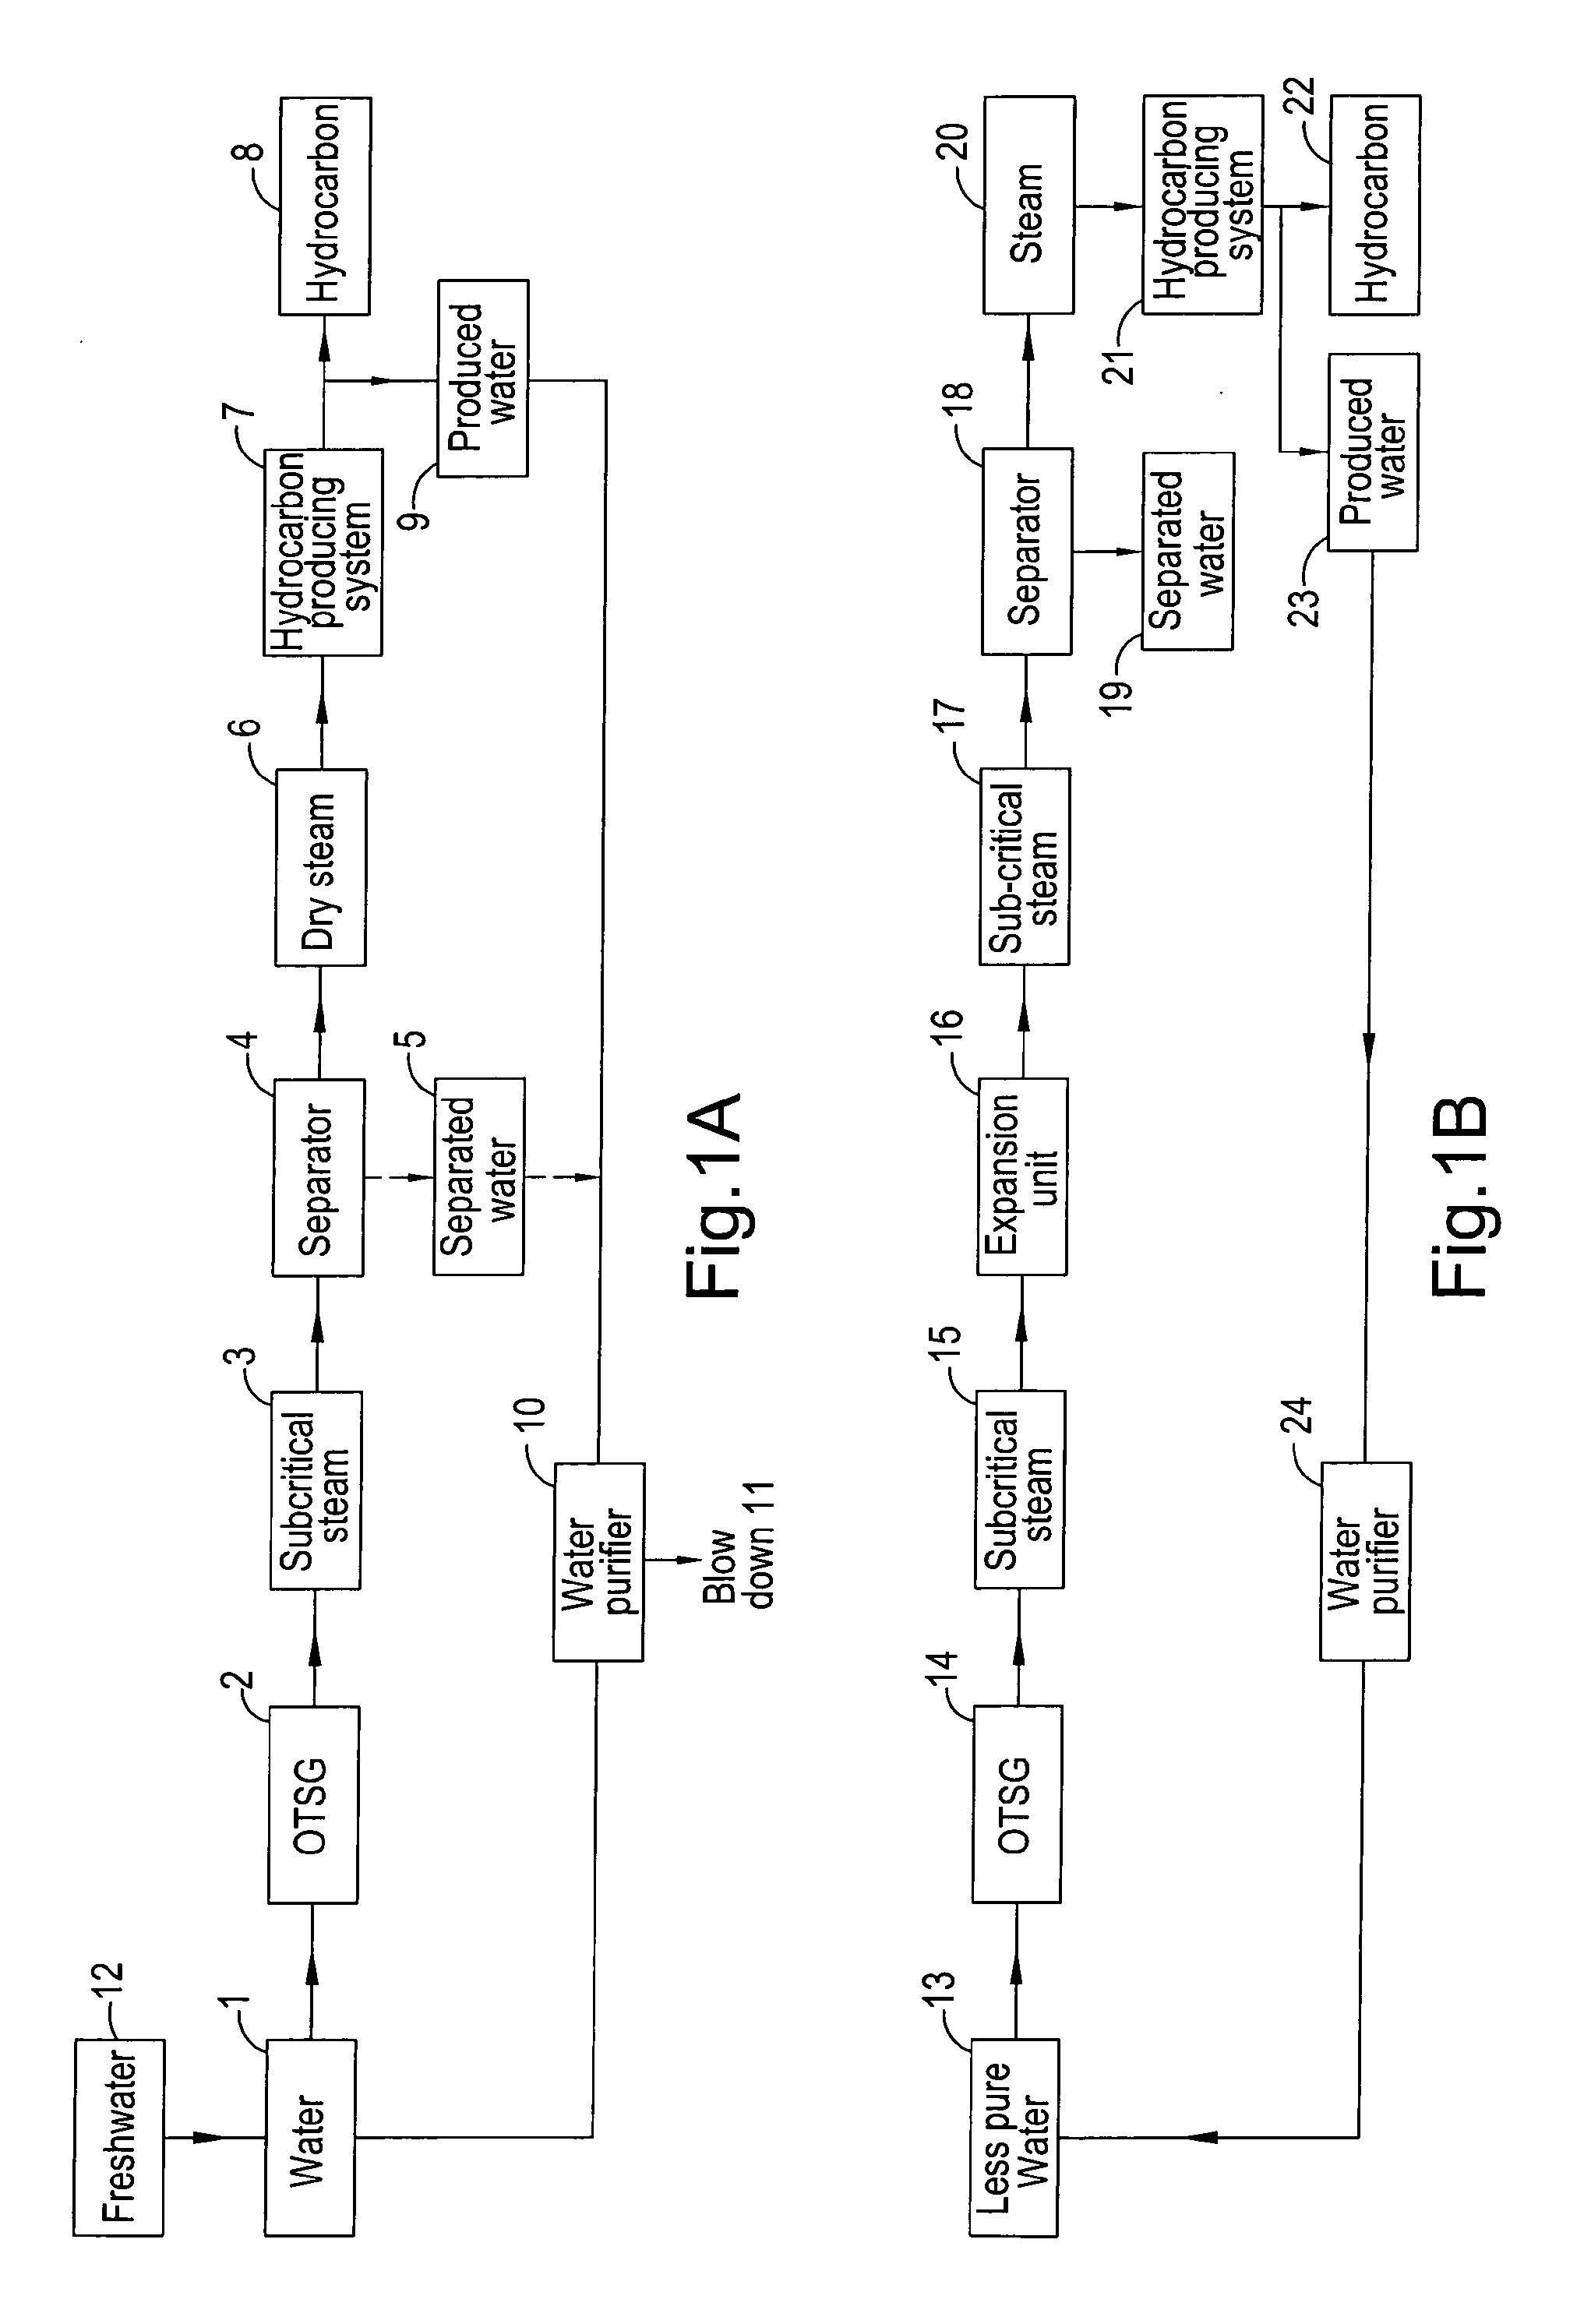 Method and apparatus for generating steam for the recovery of hydrocarbon